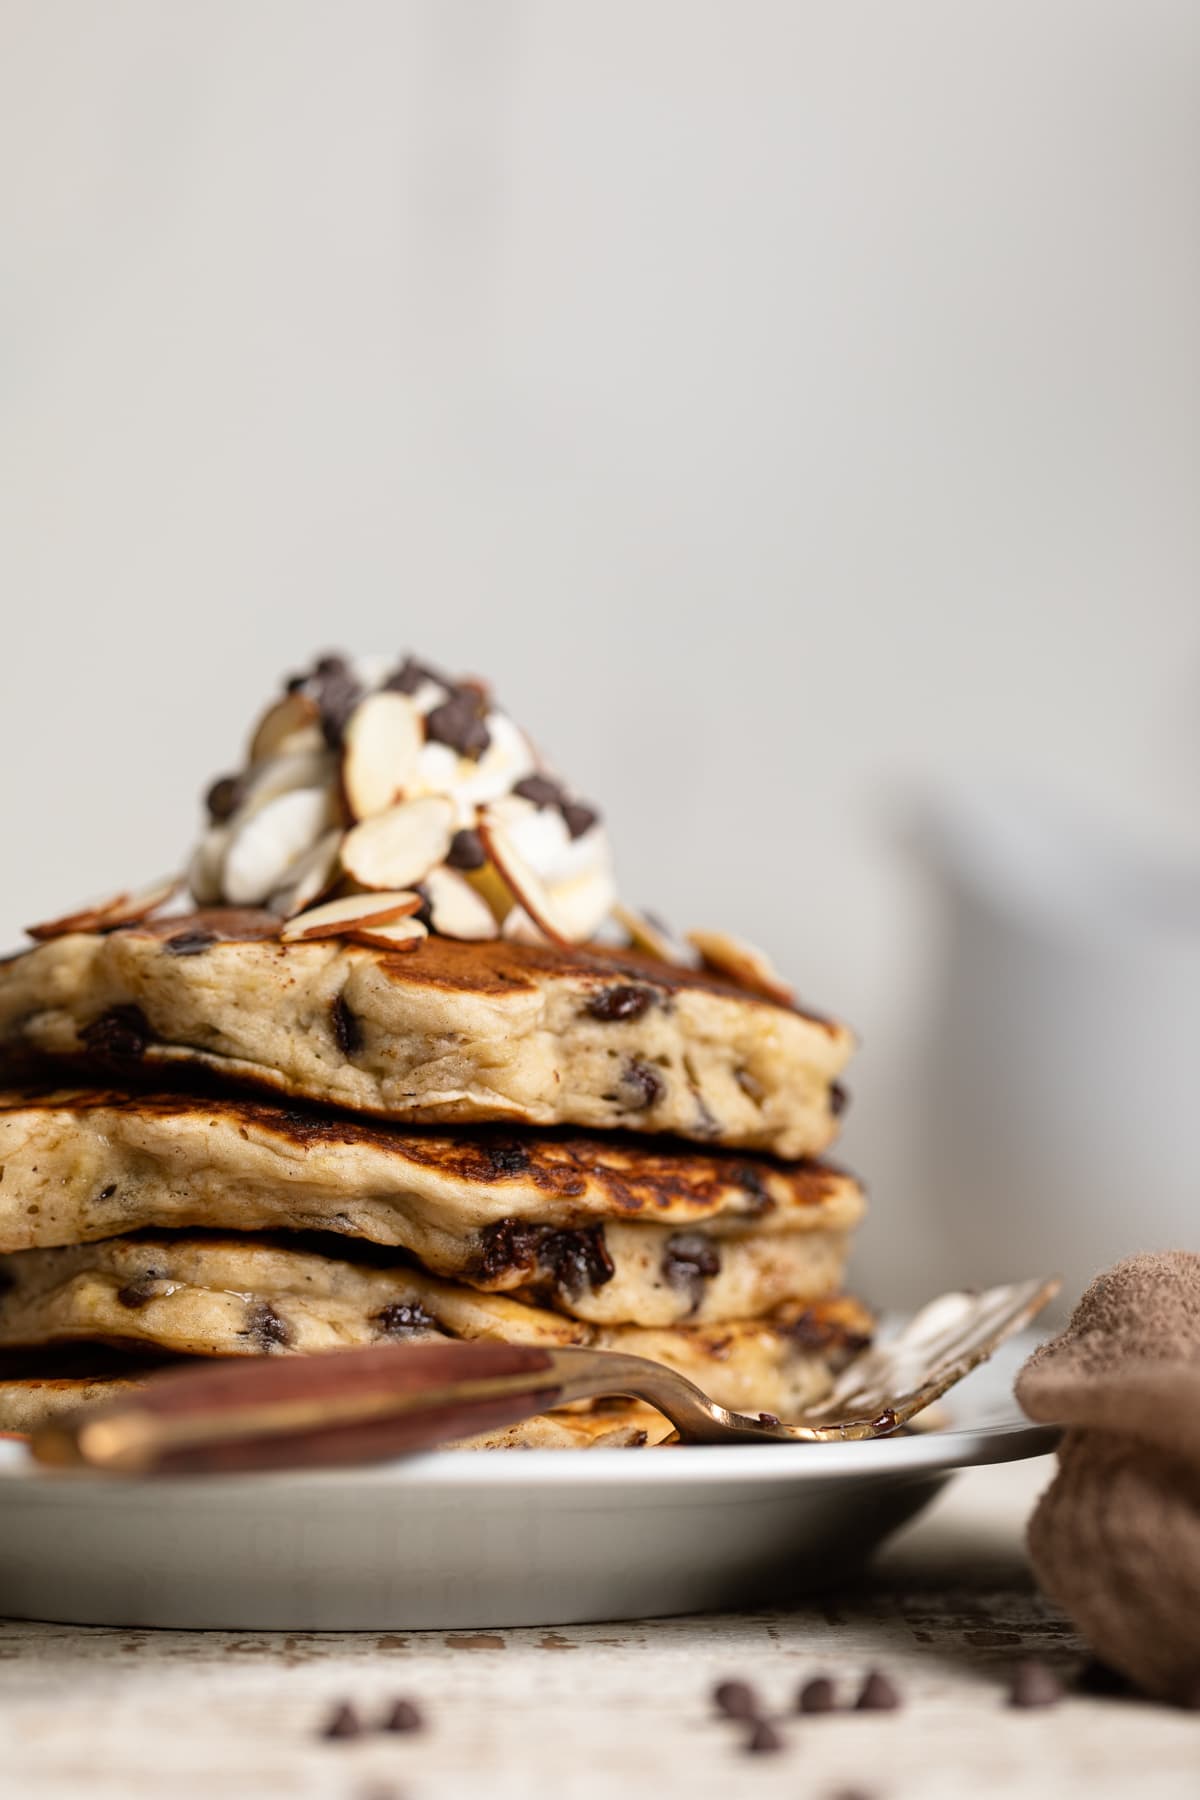 https://www.orchidsandsweettea.com/wp-content/uploads/2020/03/Chocolate-Chip-Pancakes-8-of-10.jpg